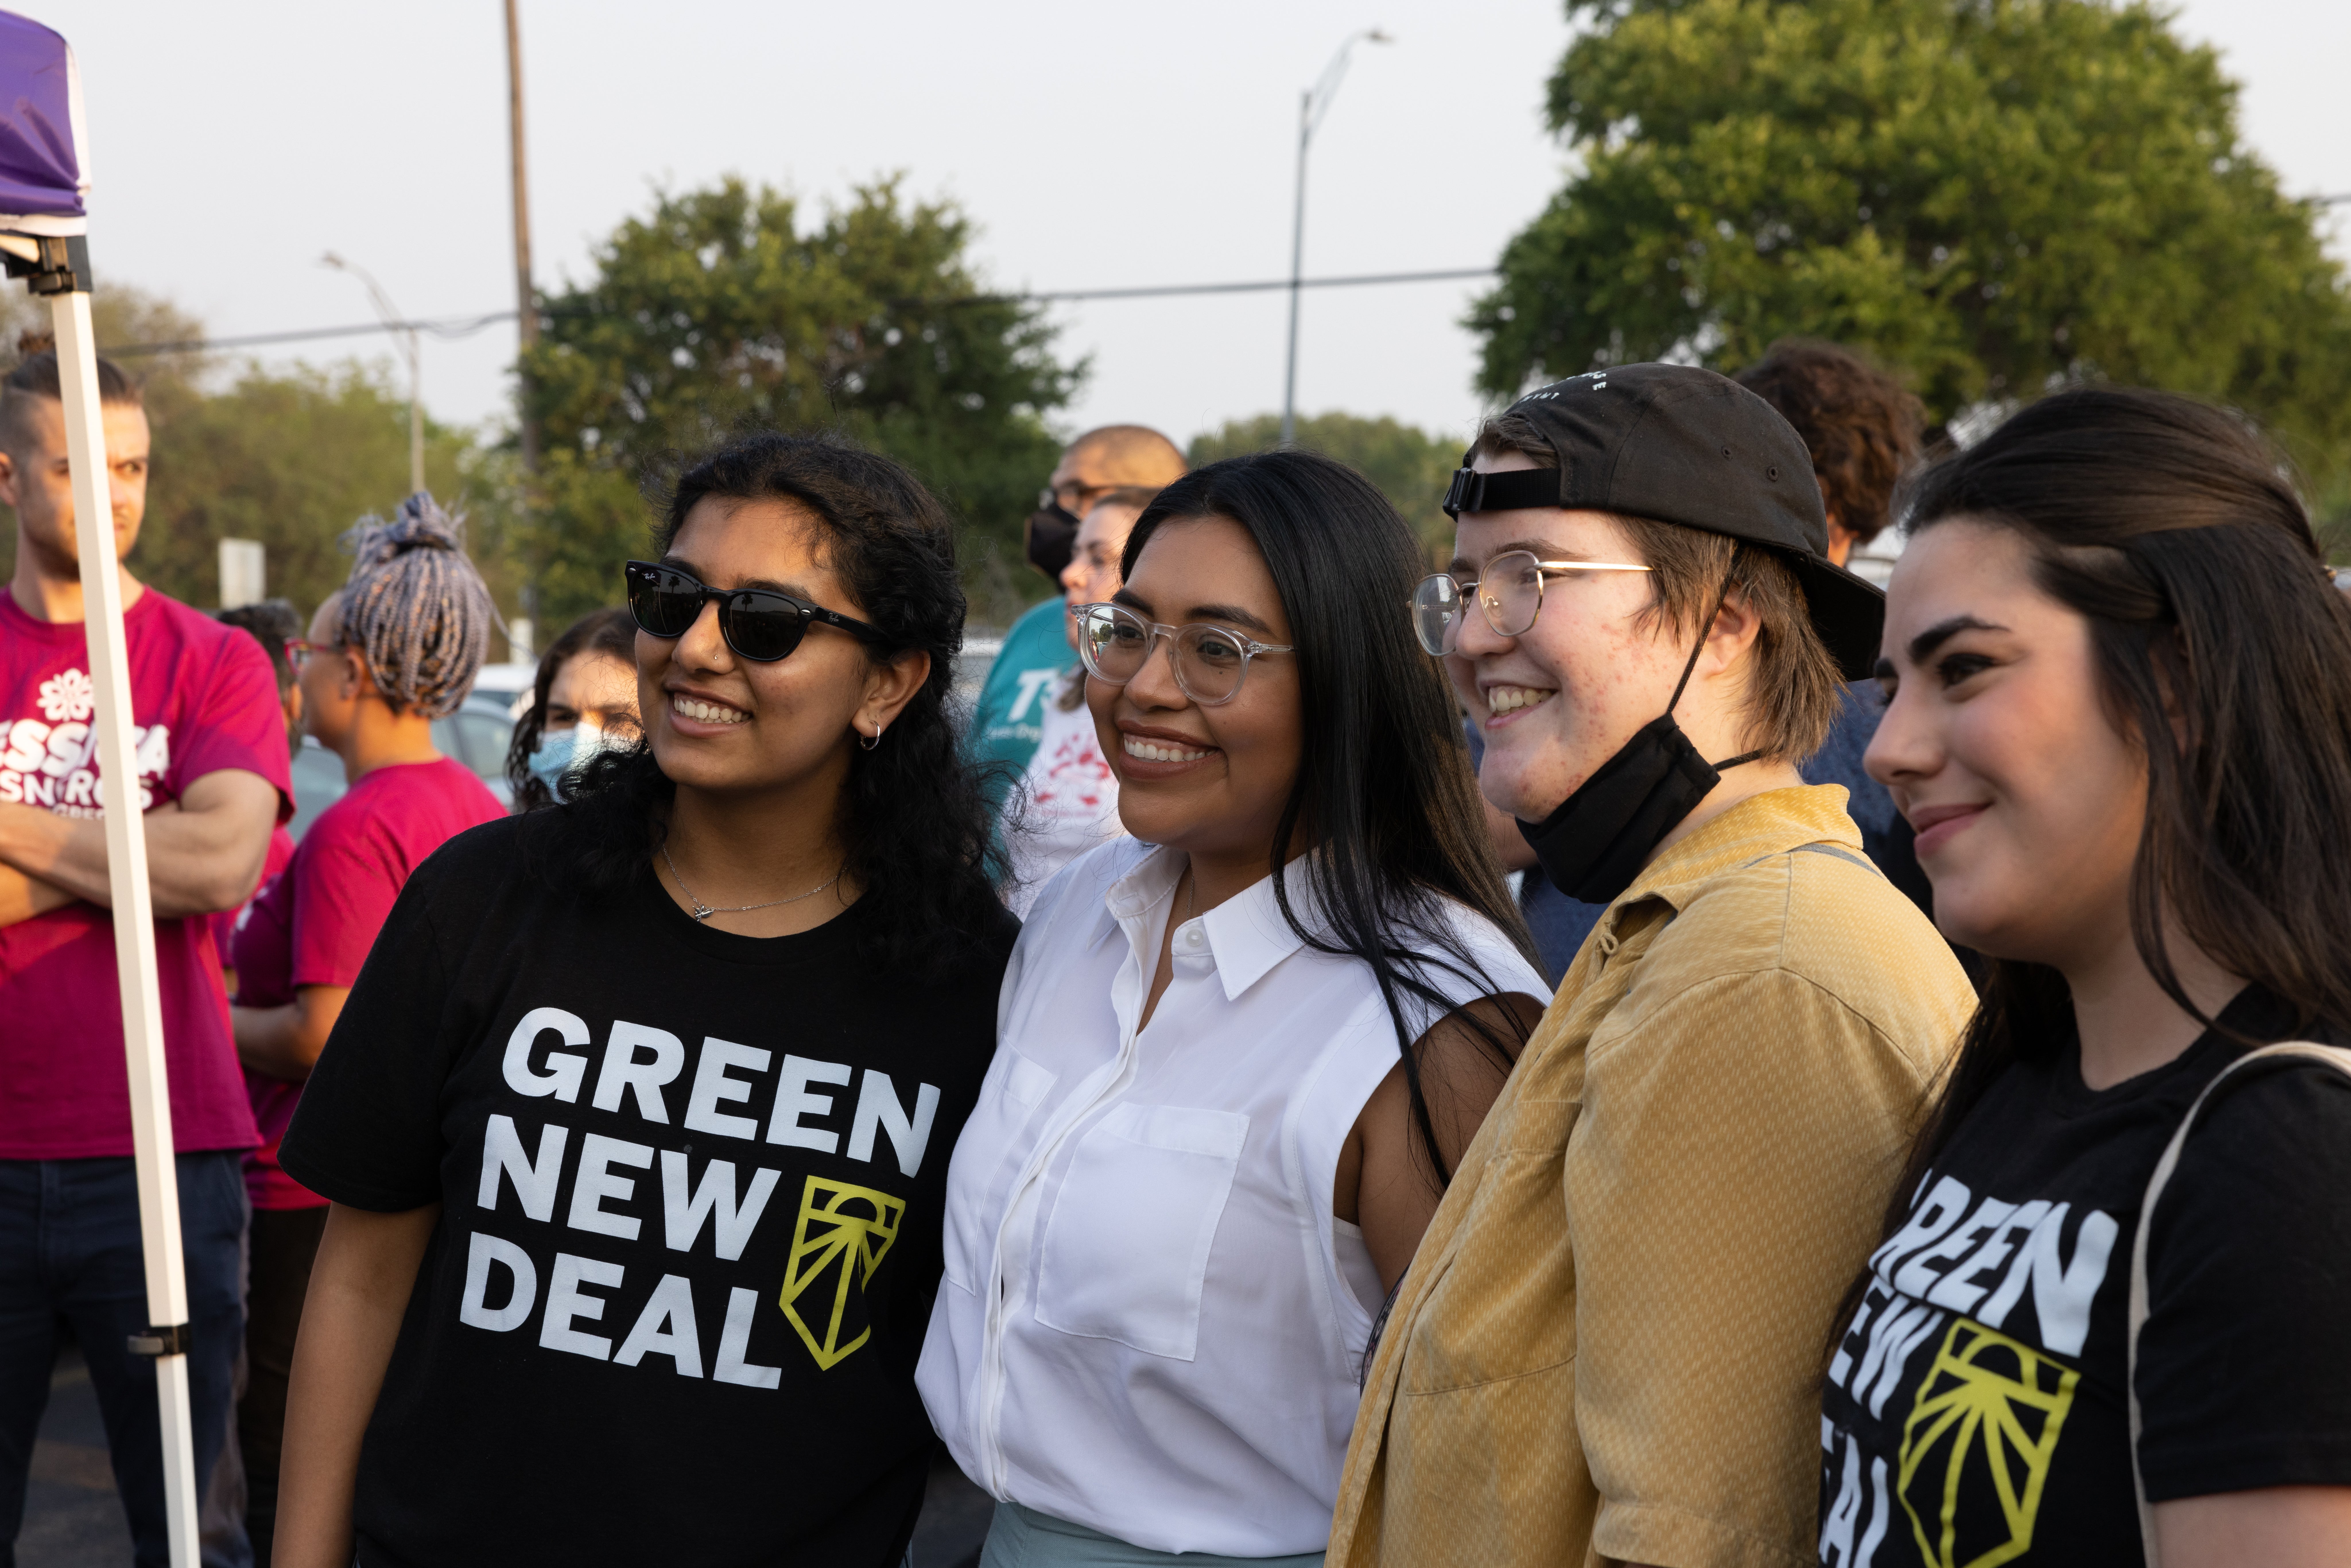 Progressive Democratic Congressional candidate Jessica Cisneros poses for photos with supporters at a nearby polling location after a campaign rally on May 20, 2022 in San Antonio, Texas.